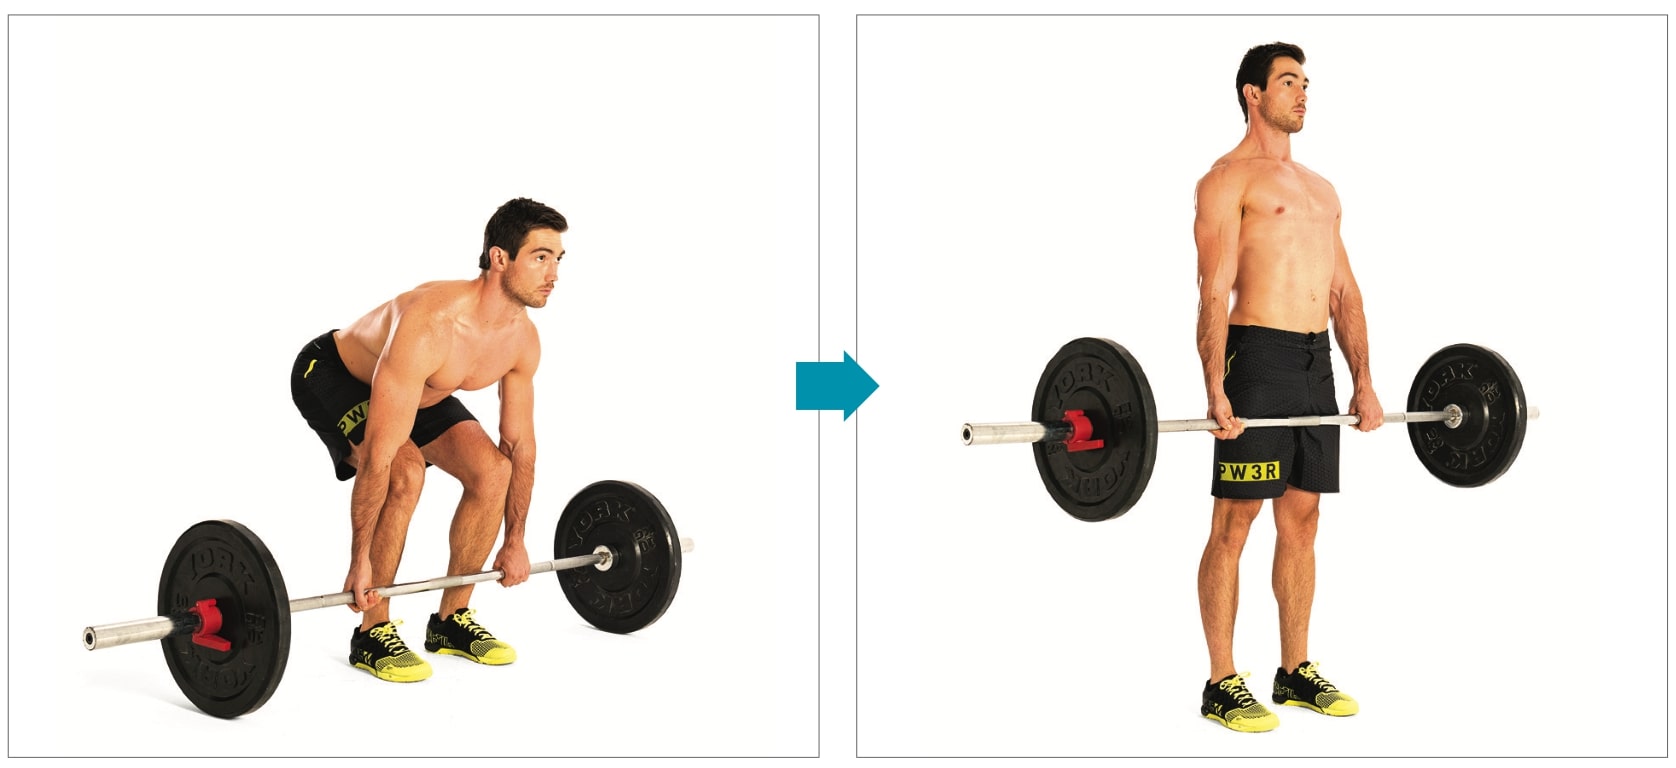 Burn Fat & Build Muscle With This Legs & Abs Workout | Men's Fitness UK